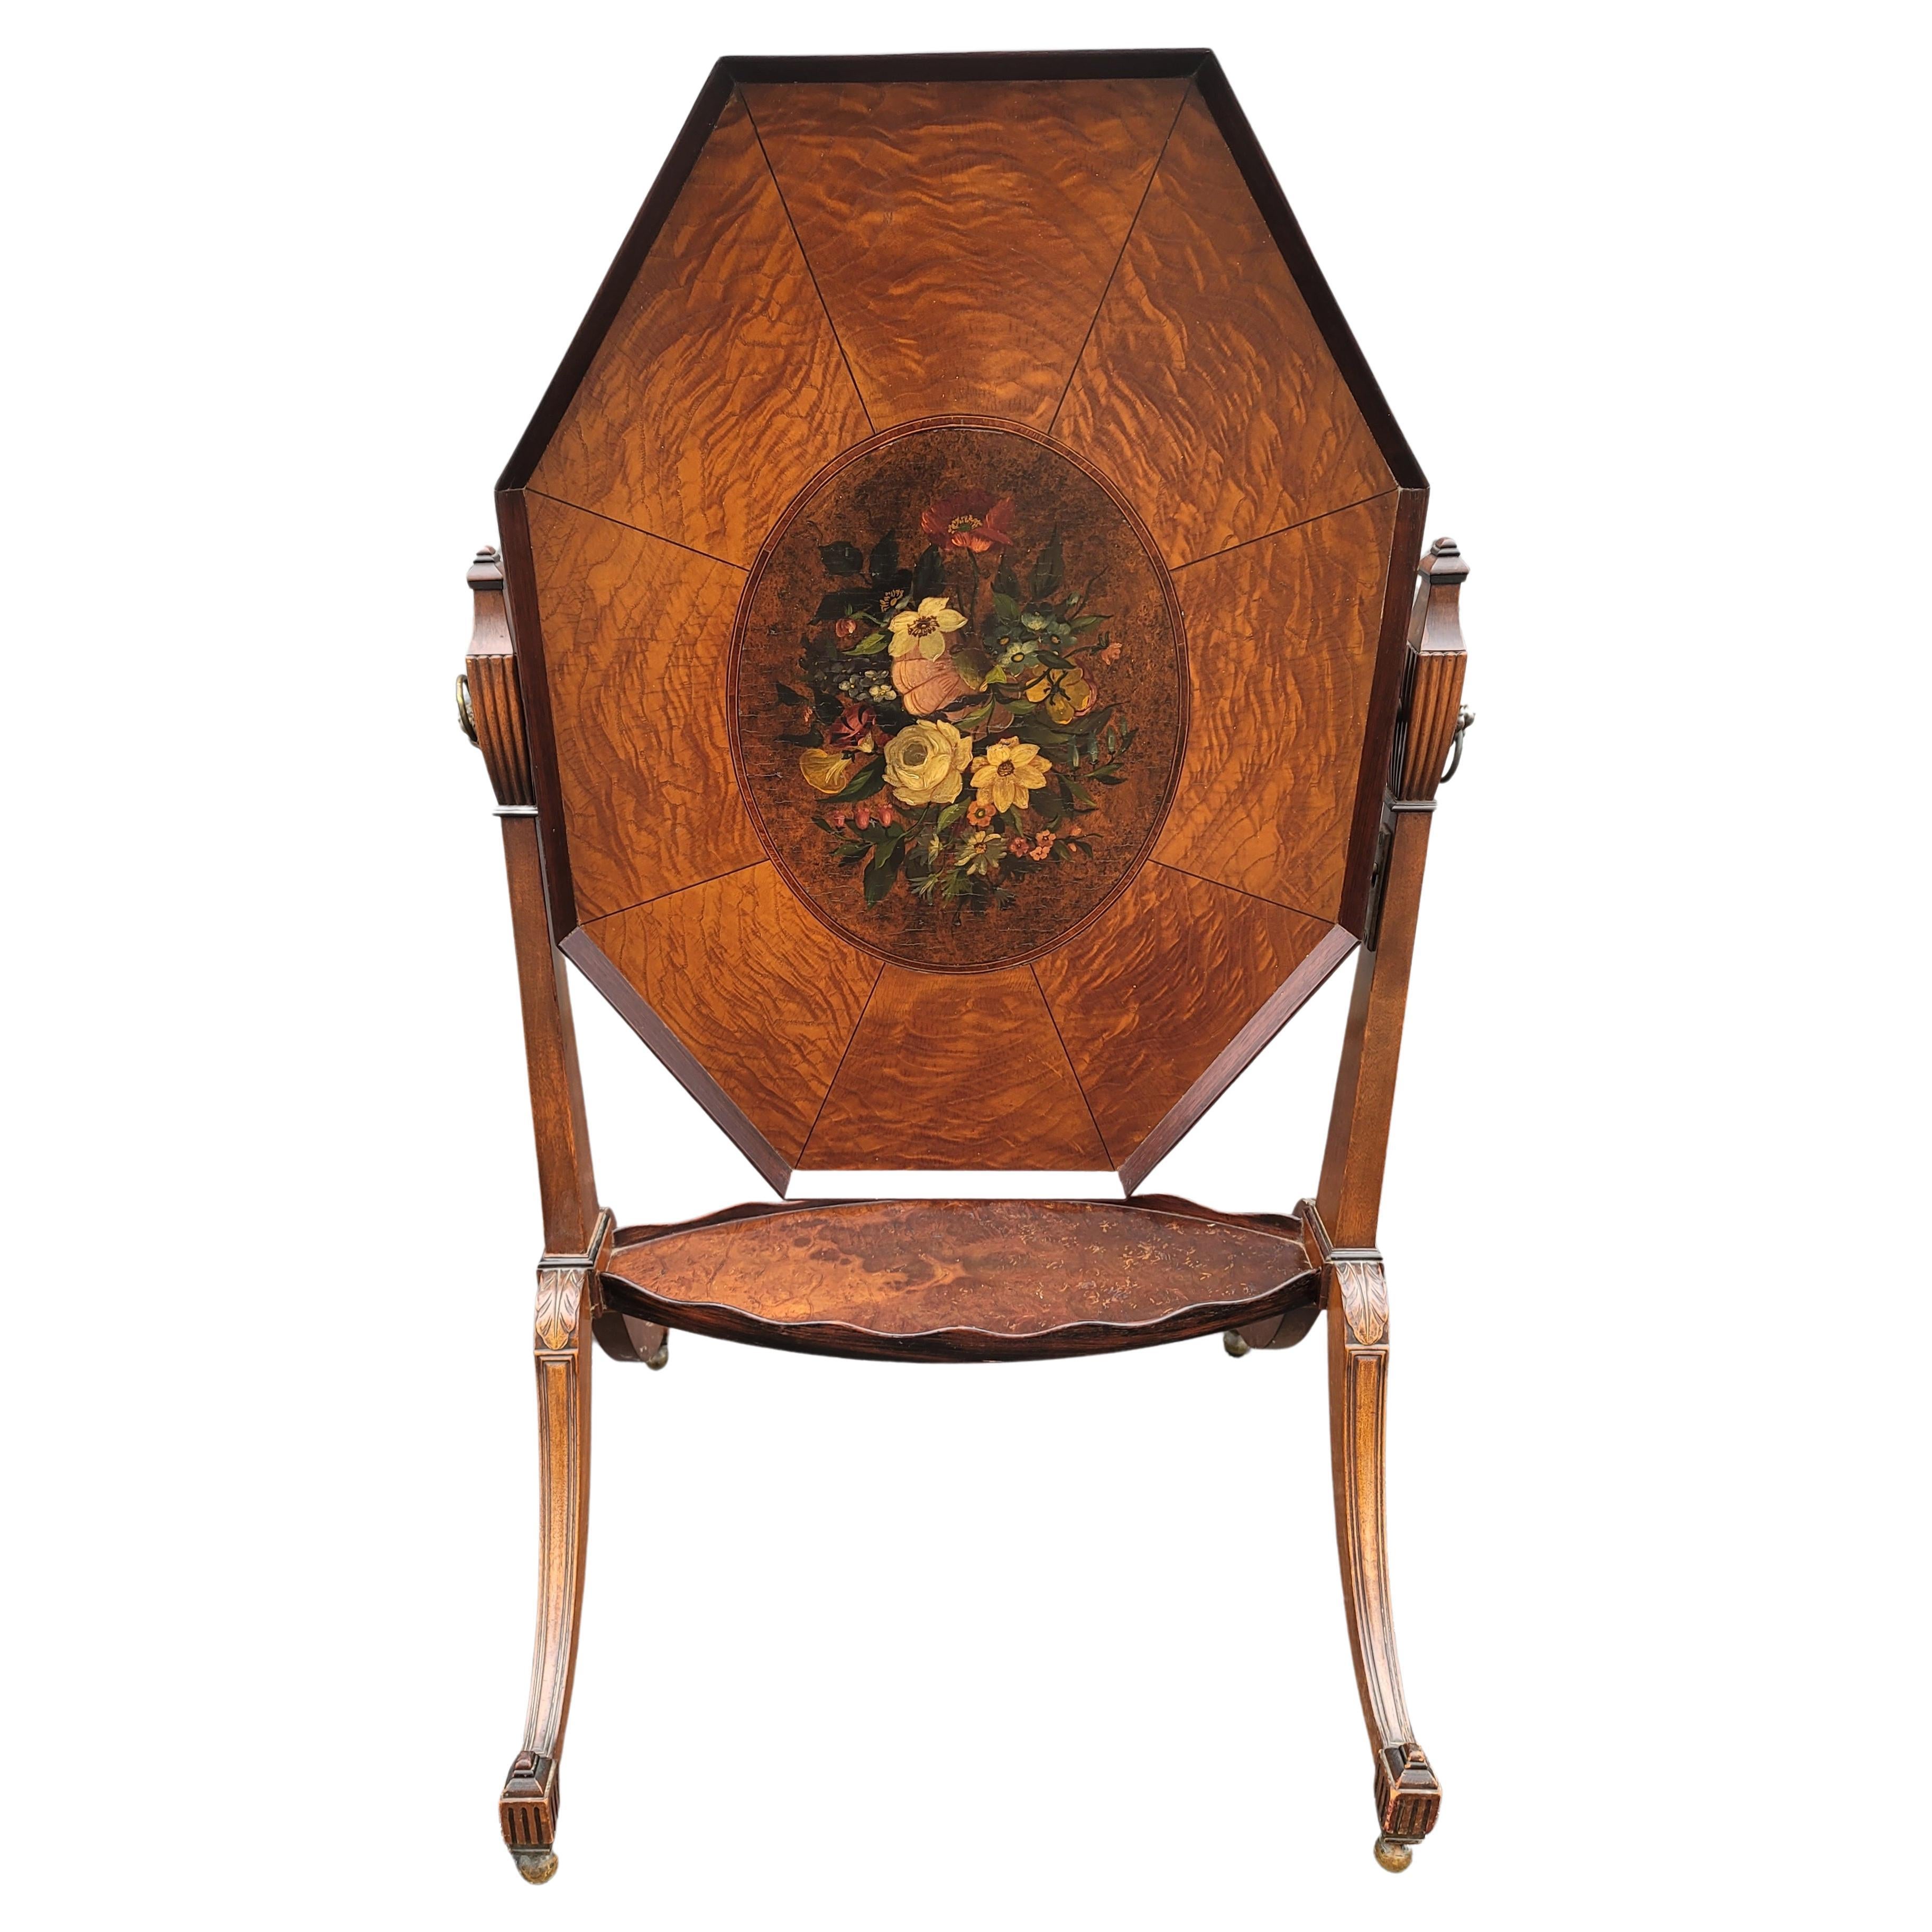 20th Century Mid-Century Edwardian Style 2-Tier Burl Walnut and Hand-Painted Tray Table For Sale